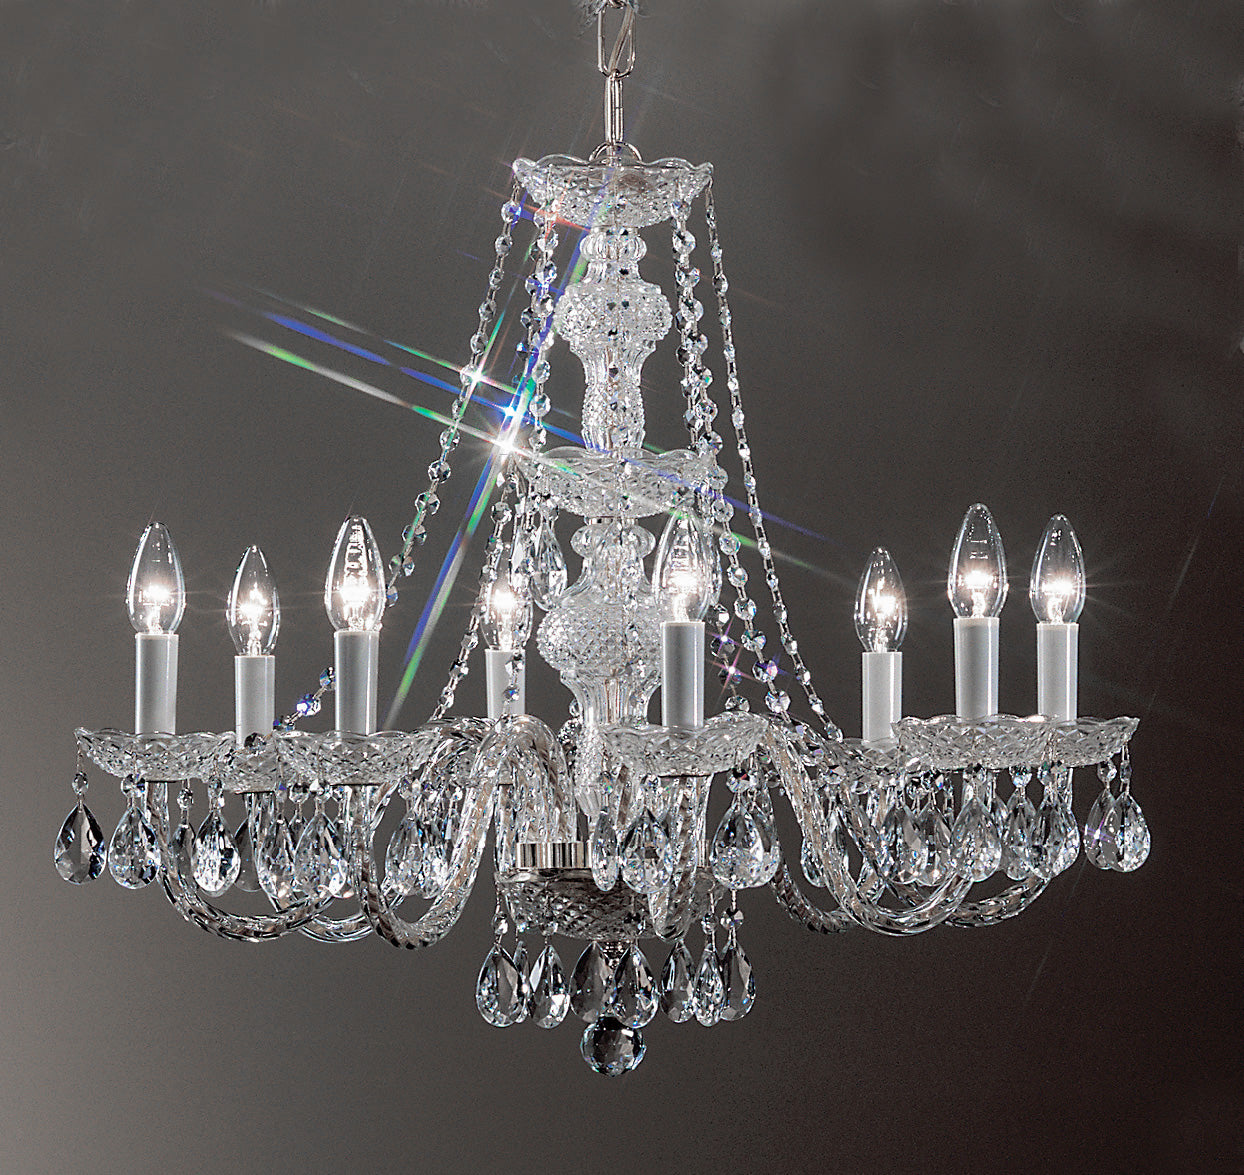 Classic Lighting 8238 CH I Monticello Crystal/Glass Chandelier in Chrome